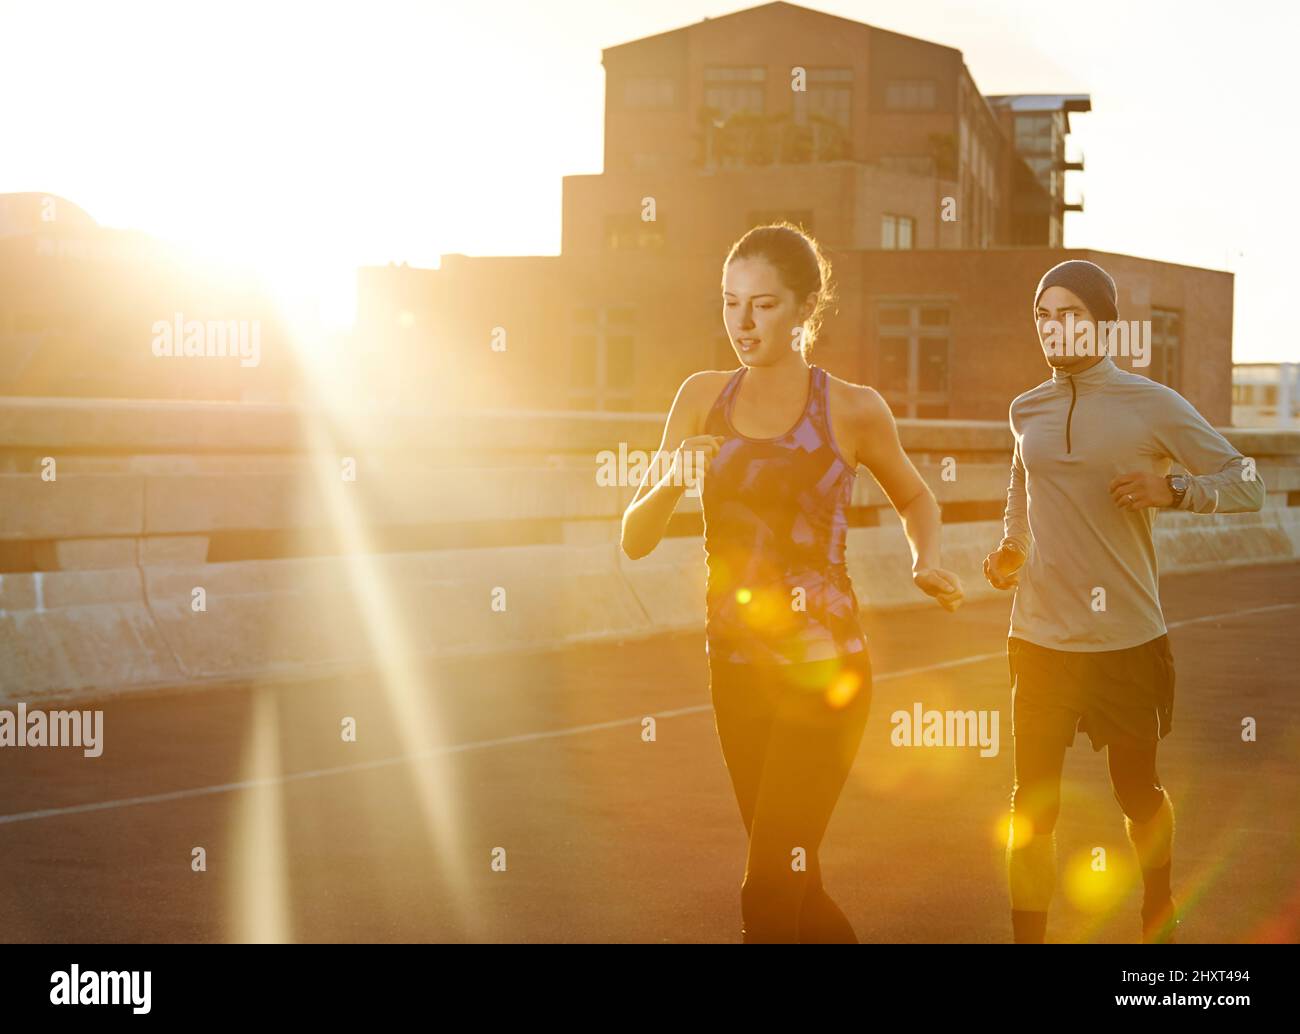 Taking the lead. Shot of two friends out jogging in the city in the early morning. Stock Photo